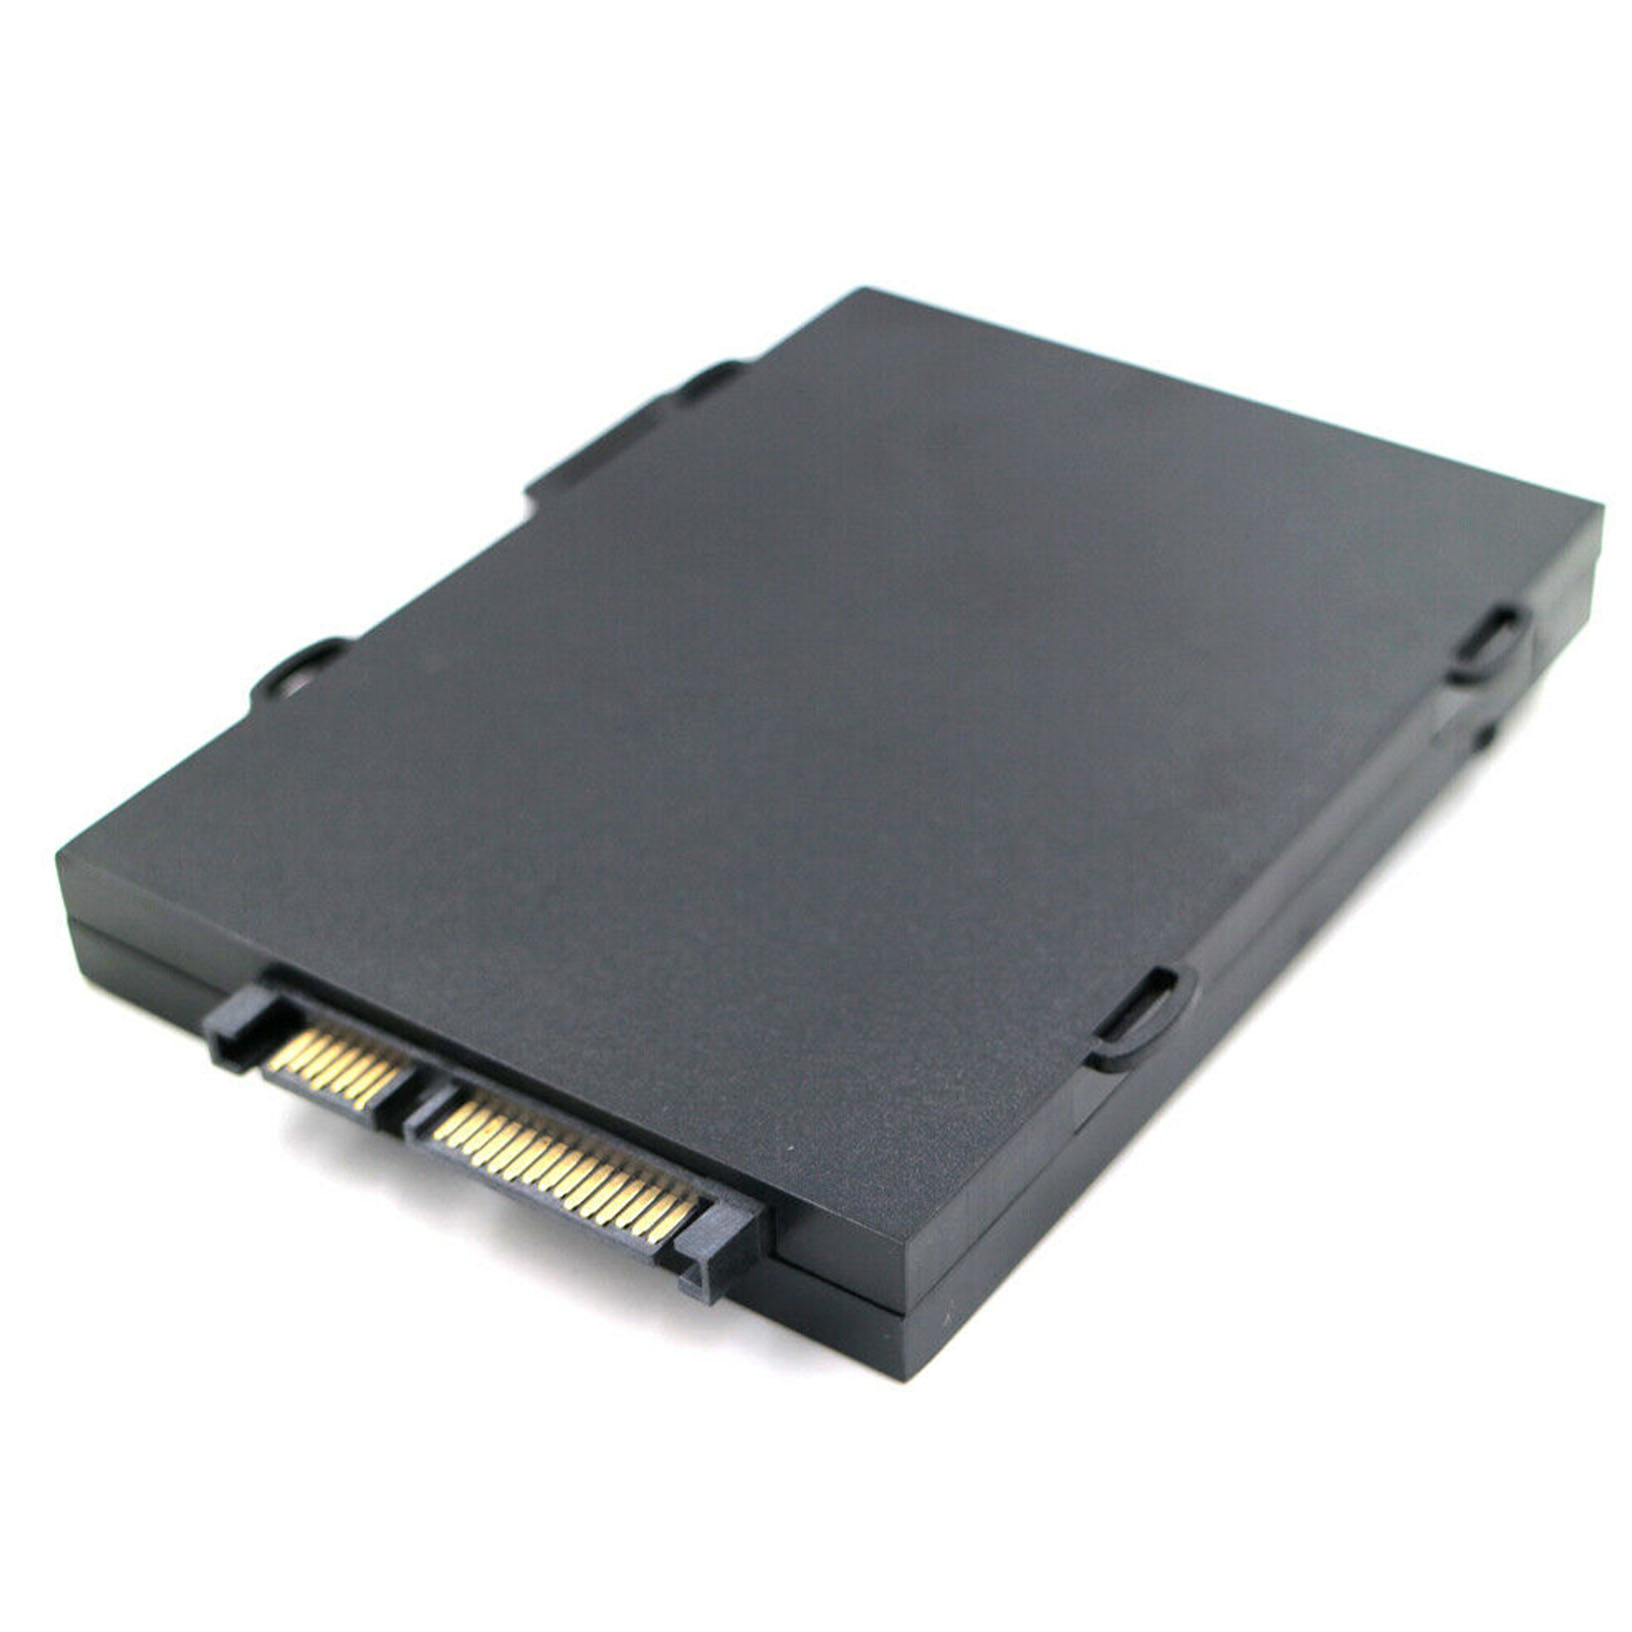 For Playstation4 PS4 External Hard Drive 3.5" 2TB Storage ...